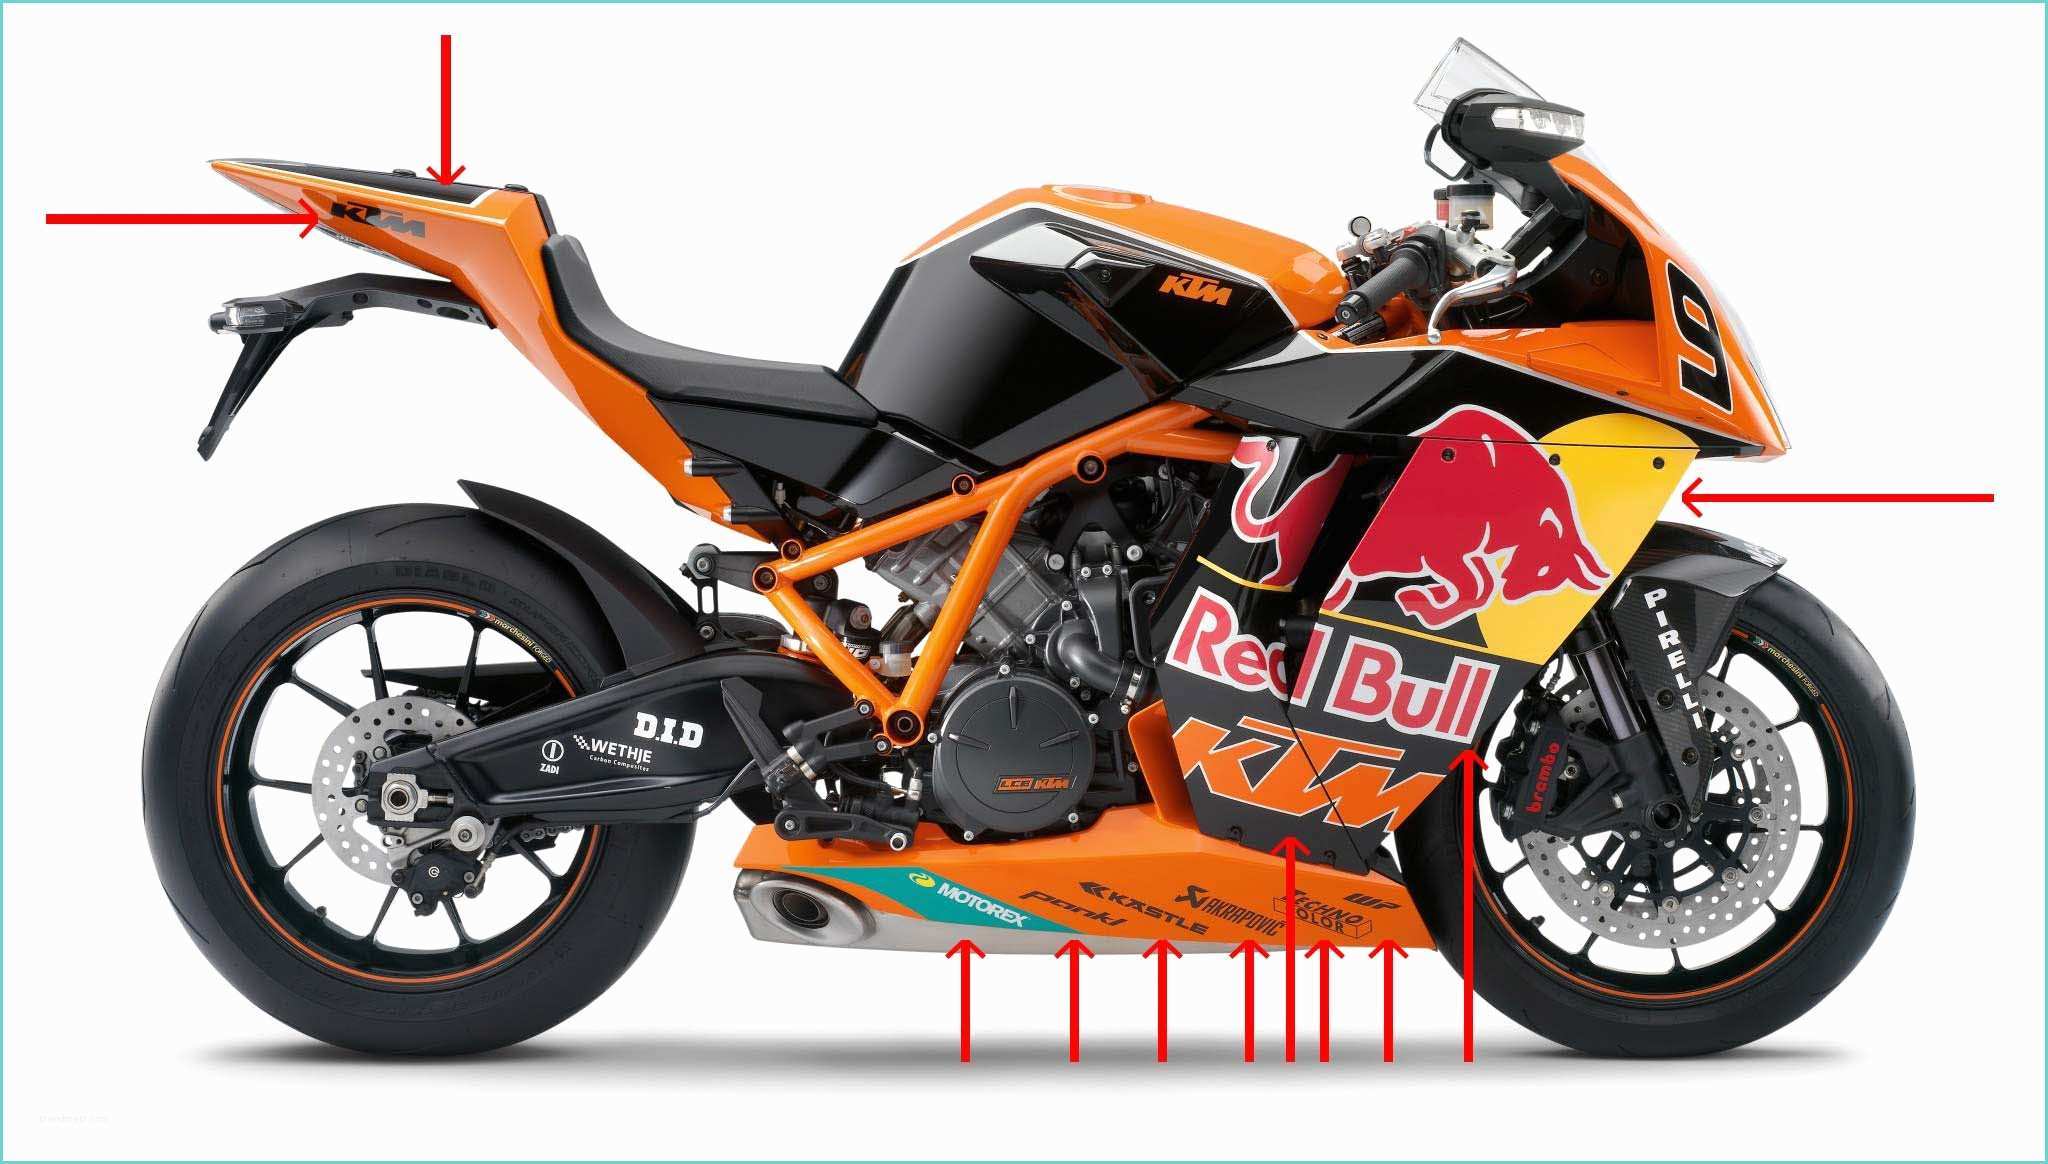 Red Bull Decals for Dirt Bikes Redbull Decals Rc8r Ktm forums Ktm Motorcycle forum